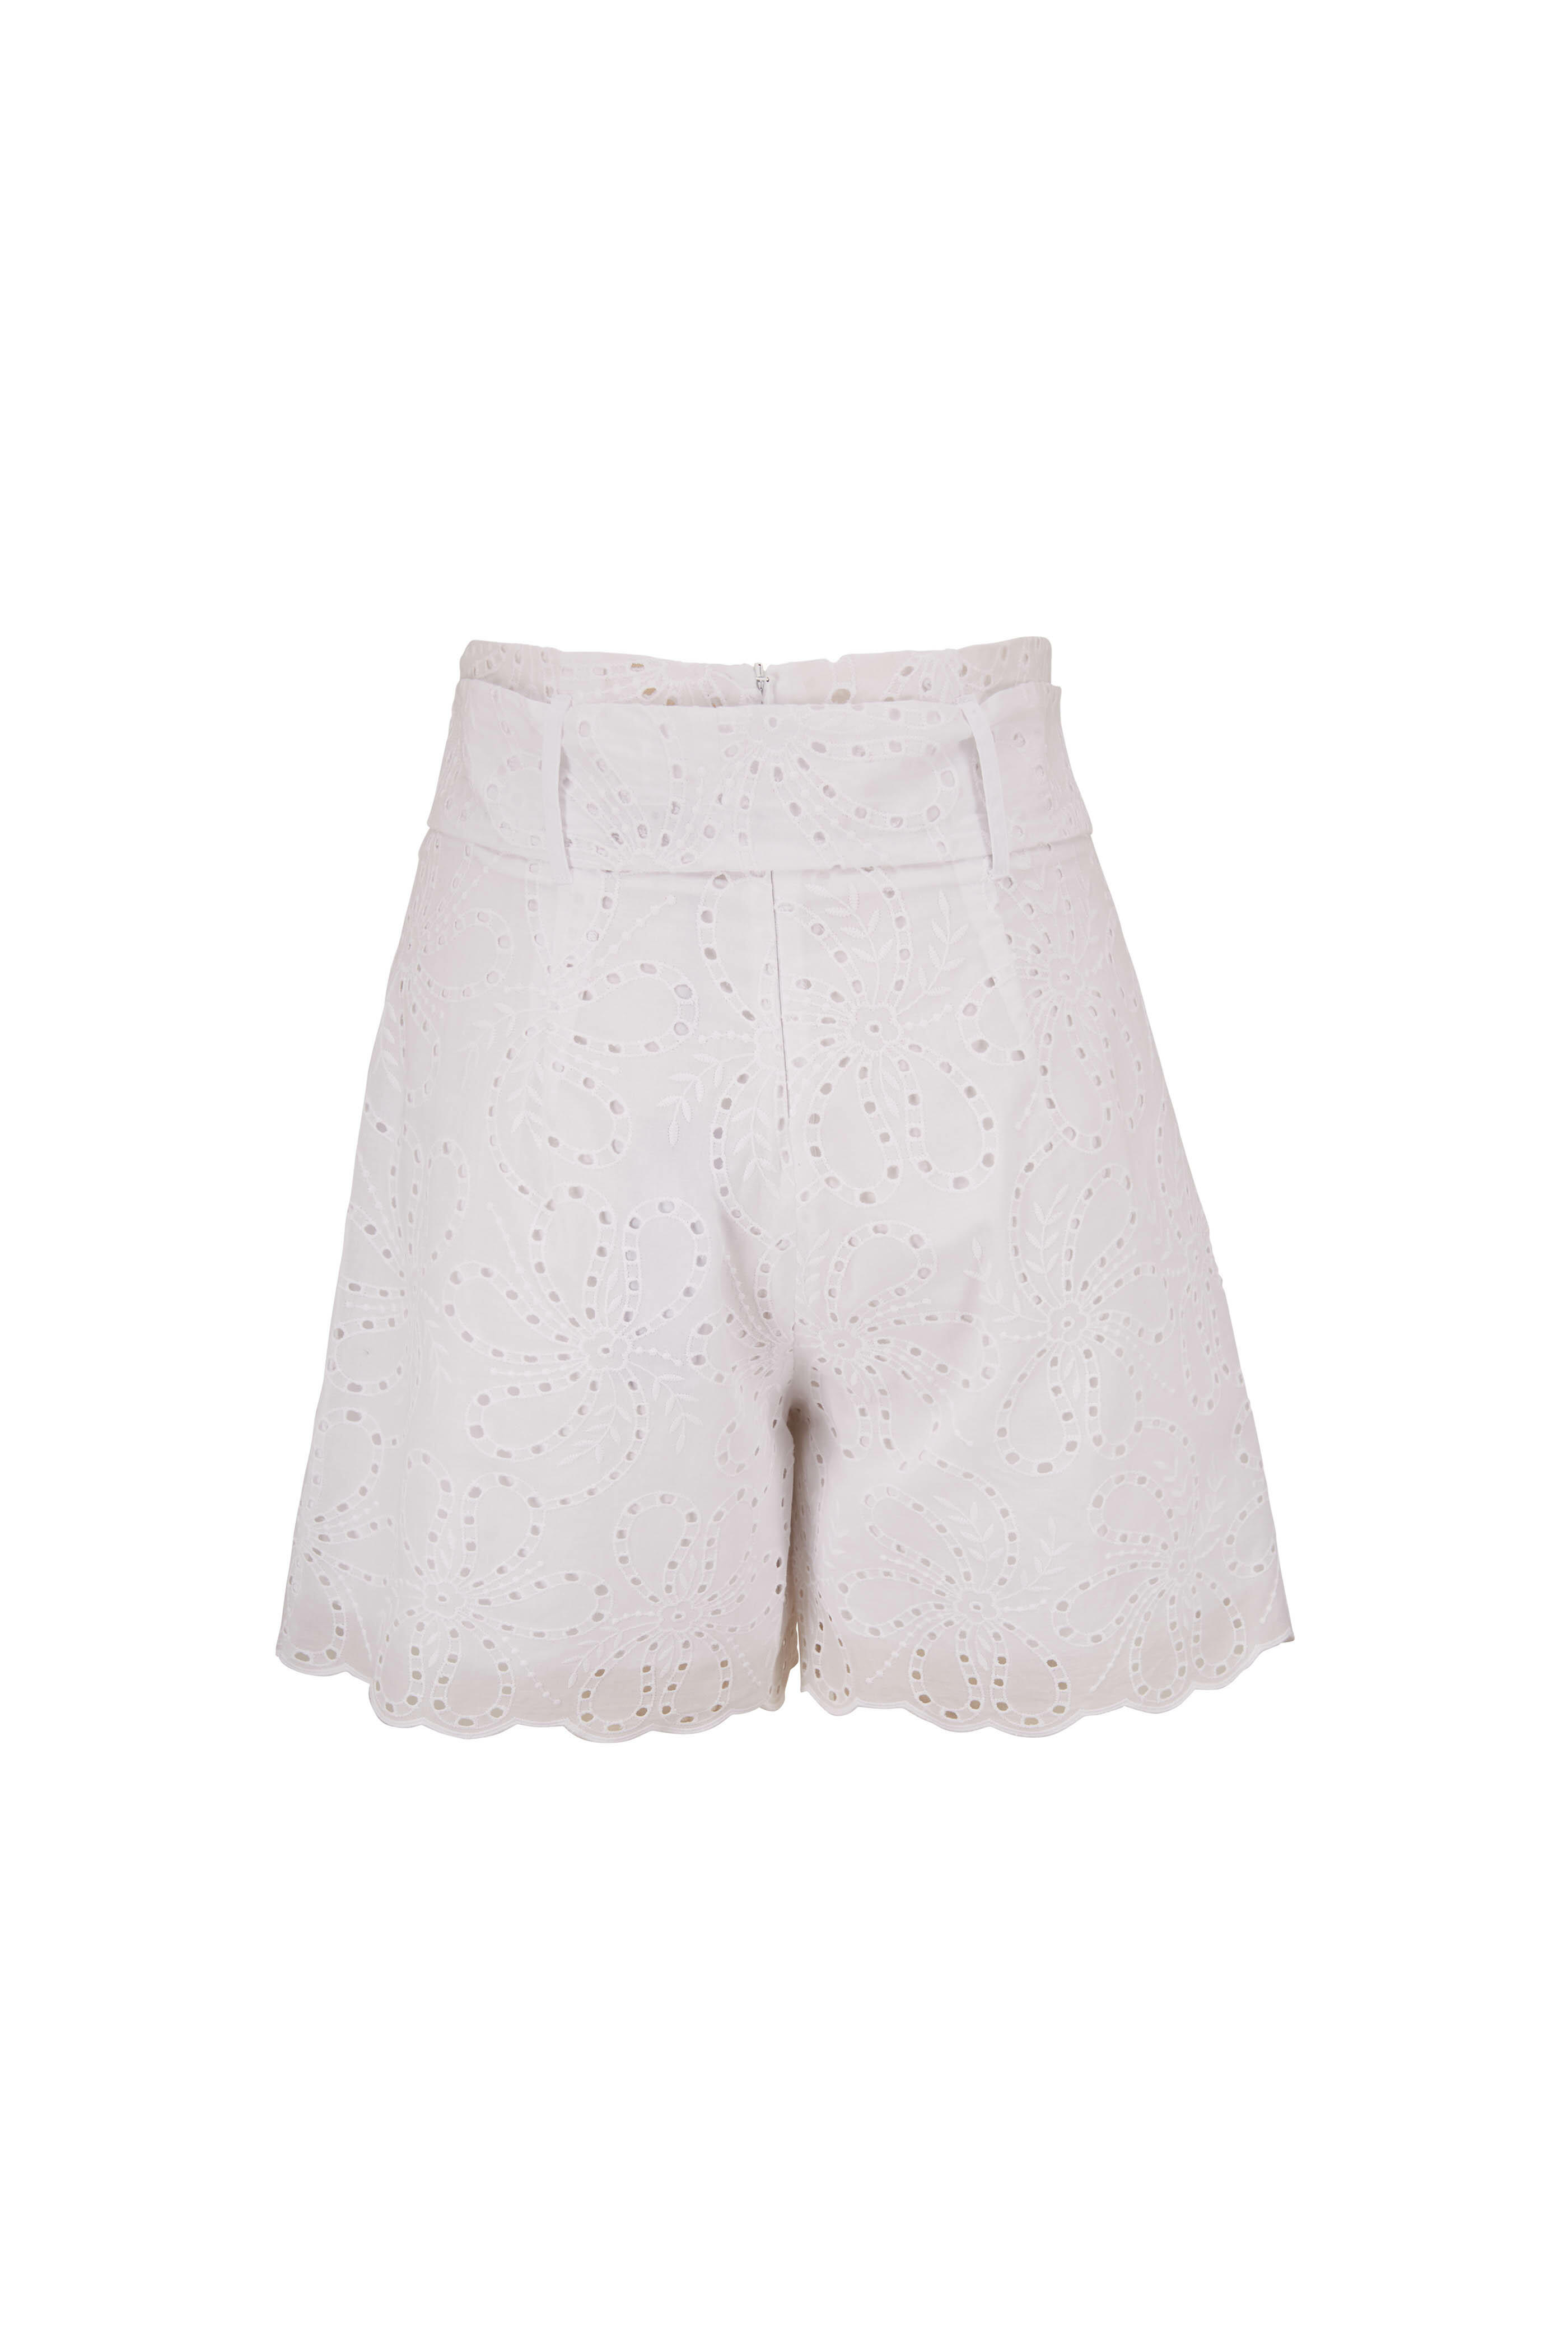 D.Exterior - White Eyelet Lace Front Tie Shorts | Mitchell Stores